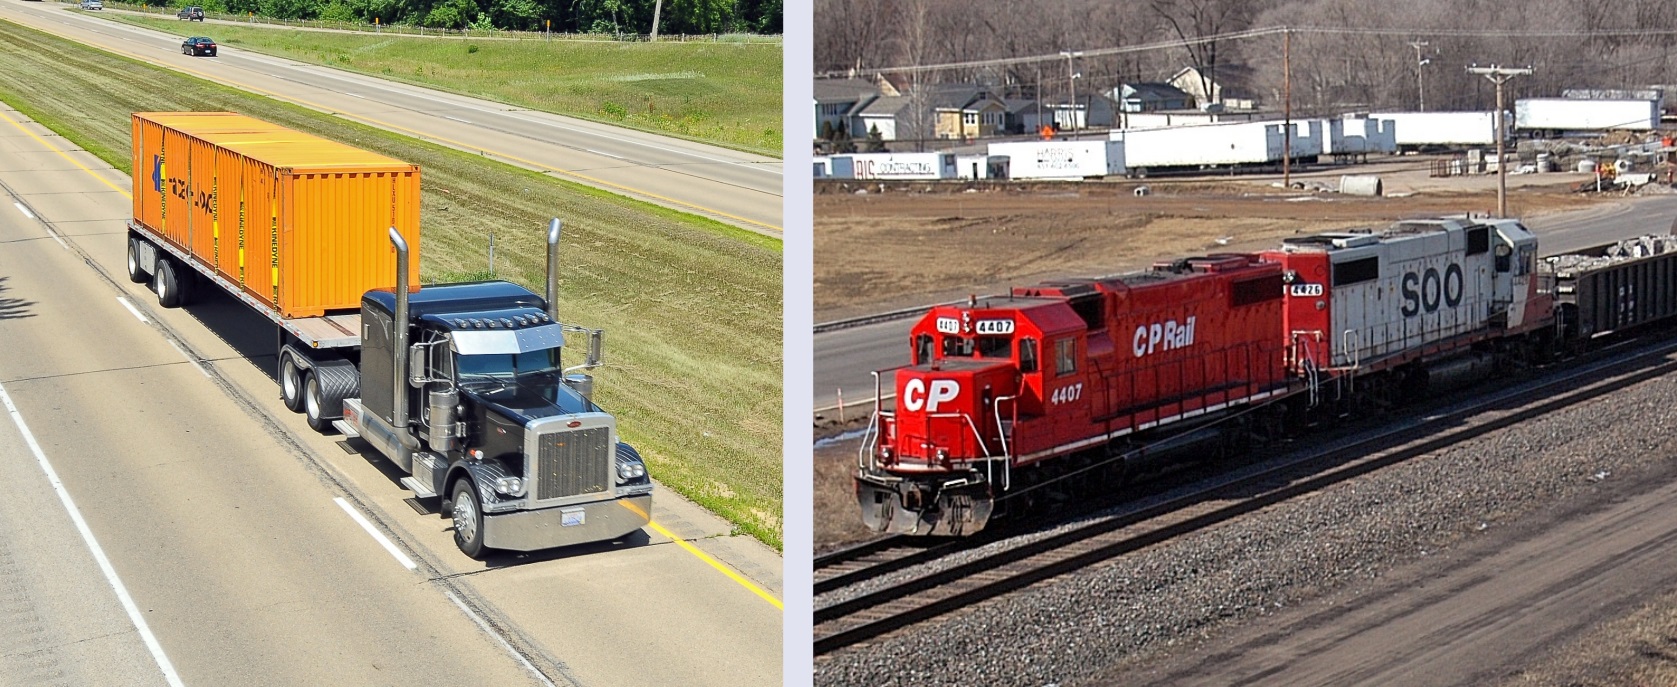 Two photos: one of a train and another of a semi truck on the highway